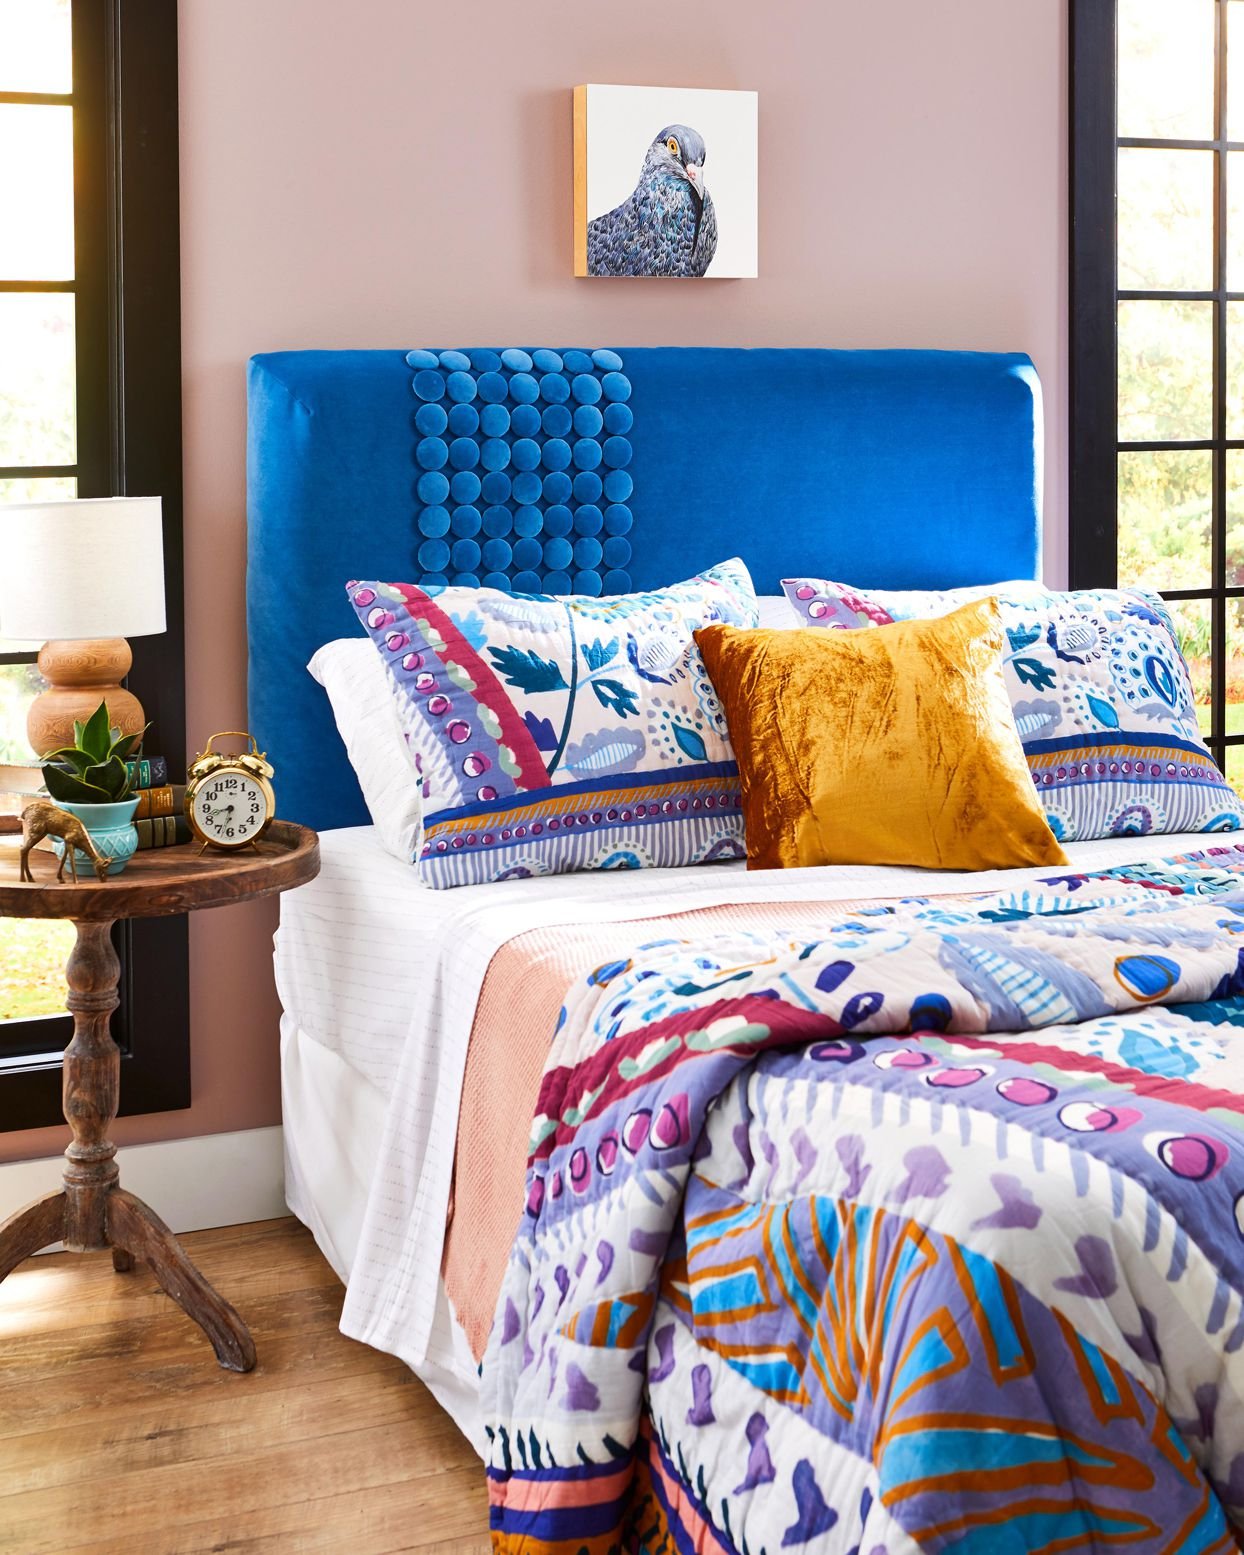 14 DIY One-Weekend Projects for Colorful Bedroom Furniture and Decor